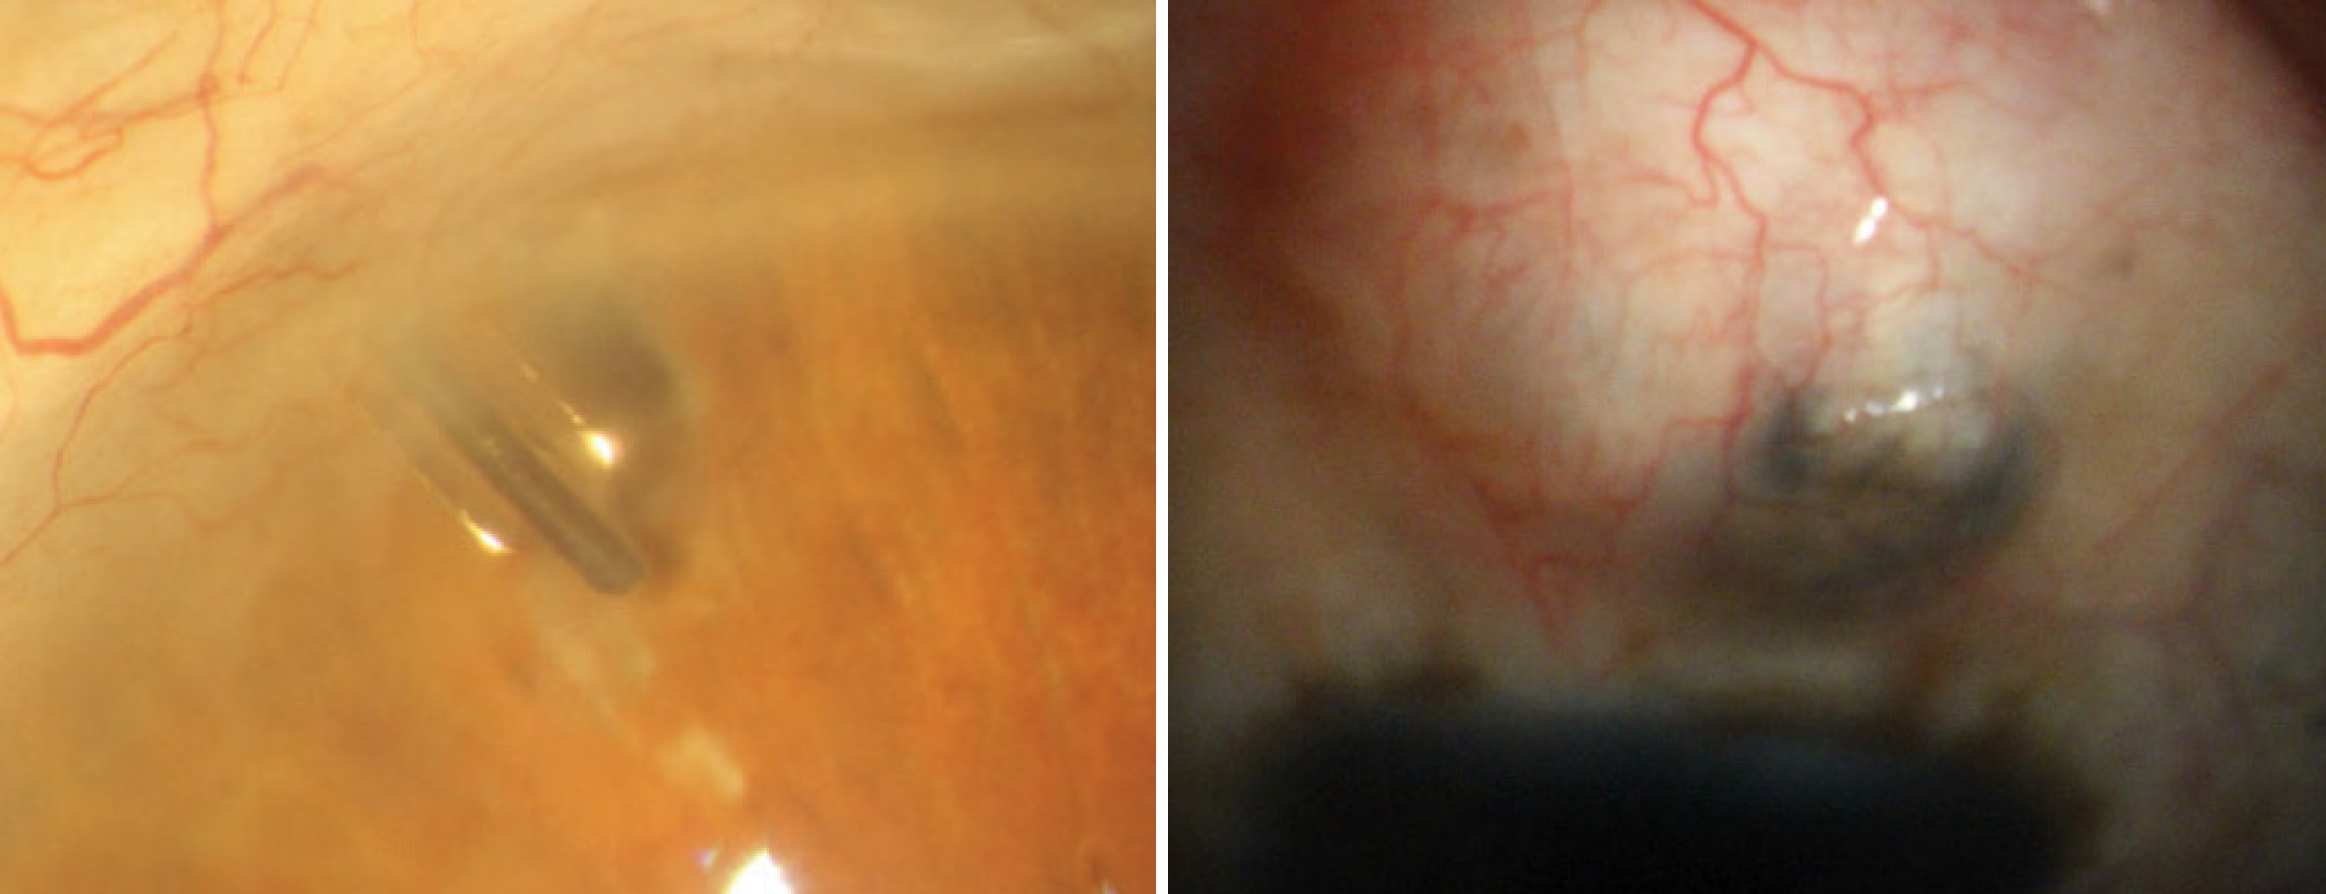 Tube shunt use (left) for advanced glaucoma reduced IOP by 12.3mm Hg in one year while trabeculectomy (right) lowered it by 11.8mm hg, a recent data analysis shows.